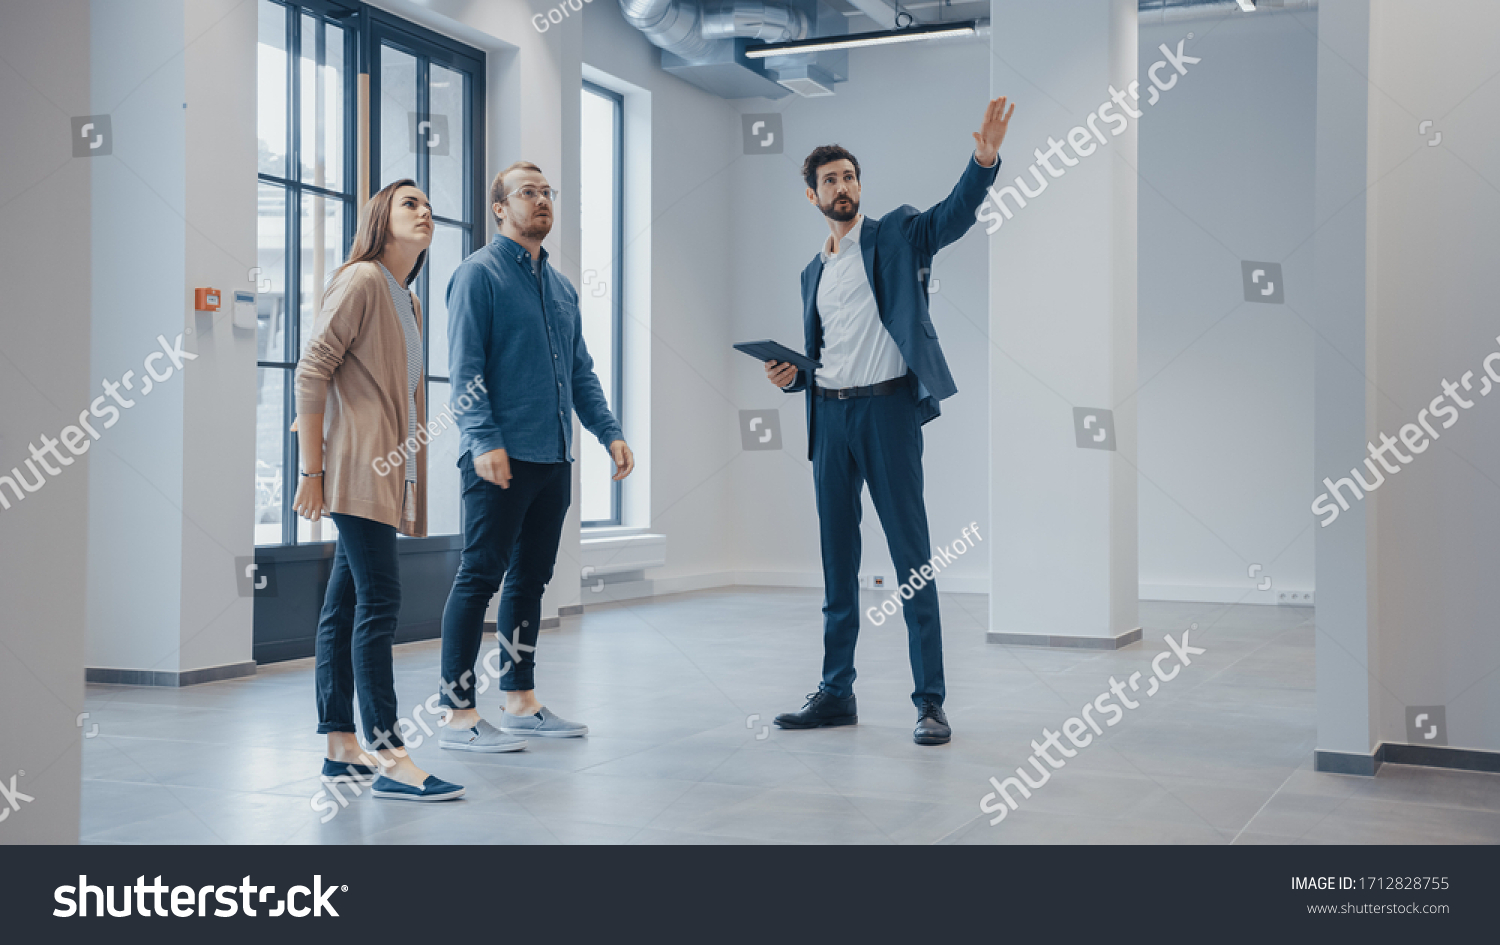 Real Estate Agent Showing a New Empty Office Space to Young Male and Female Hipsters. Entrepreneurs Meet the Broker with a Tablet and Discuss the Facility They Wish to Purchase or Rent. #1712828755